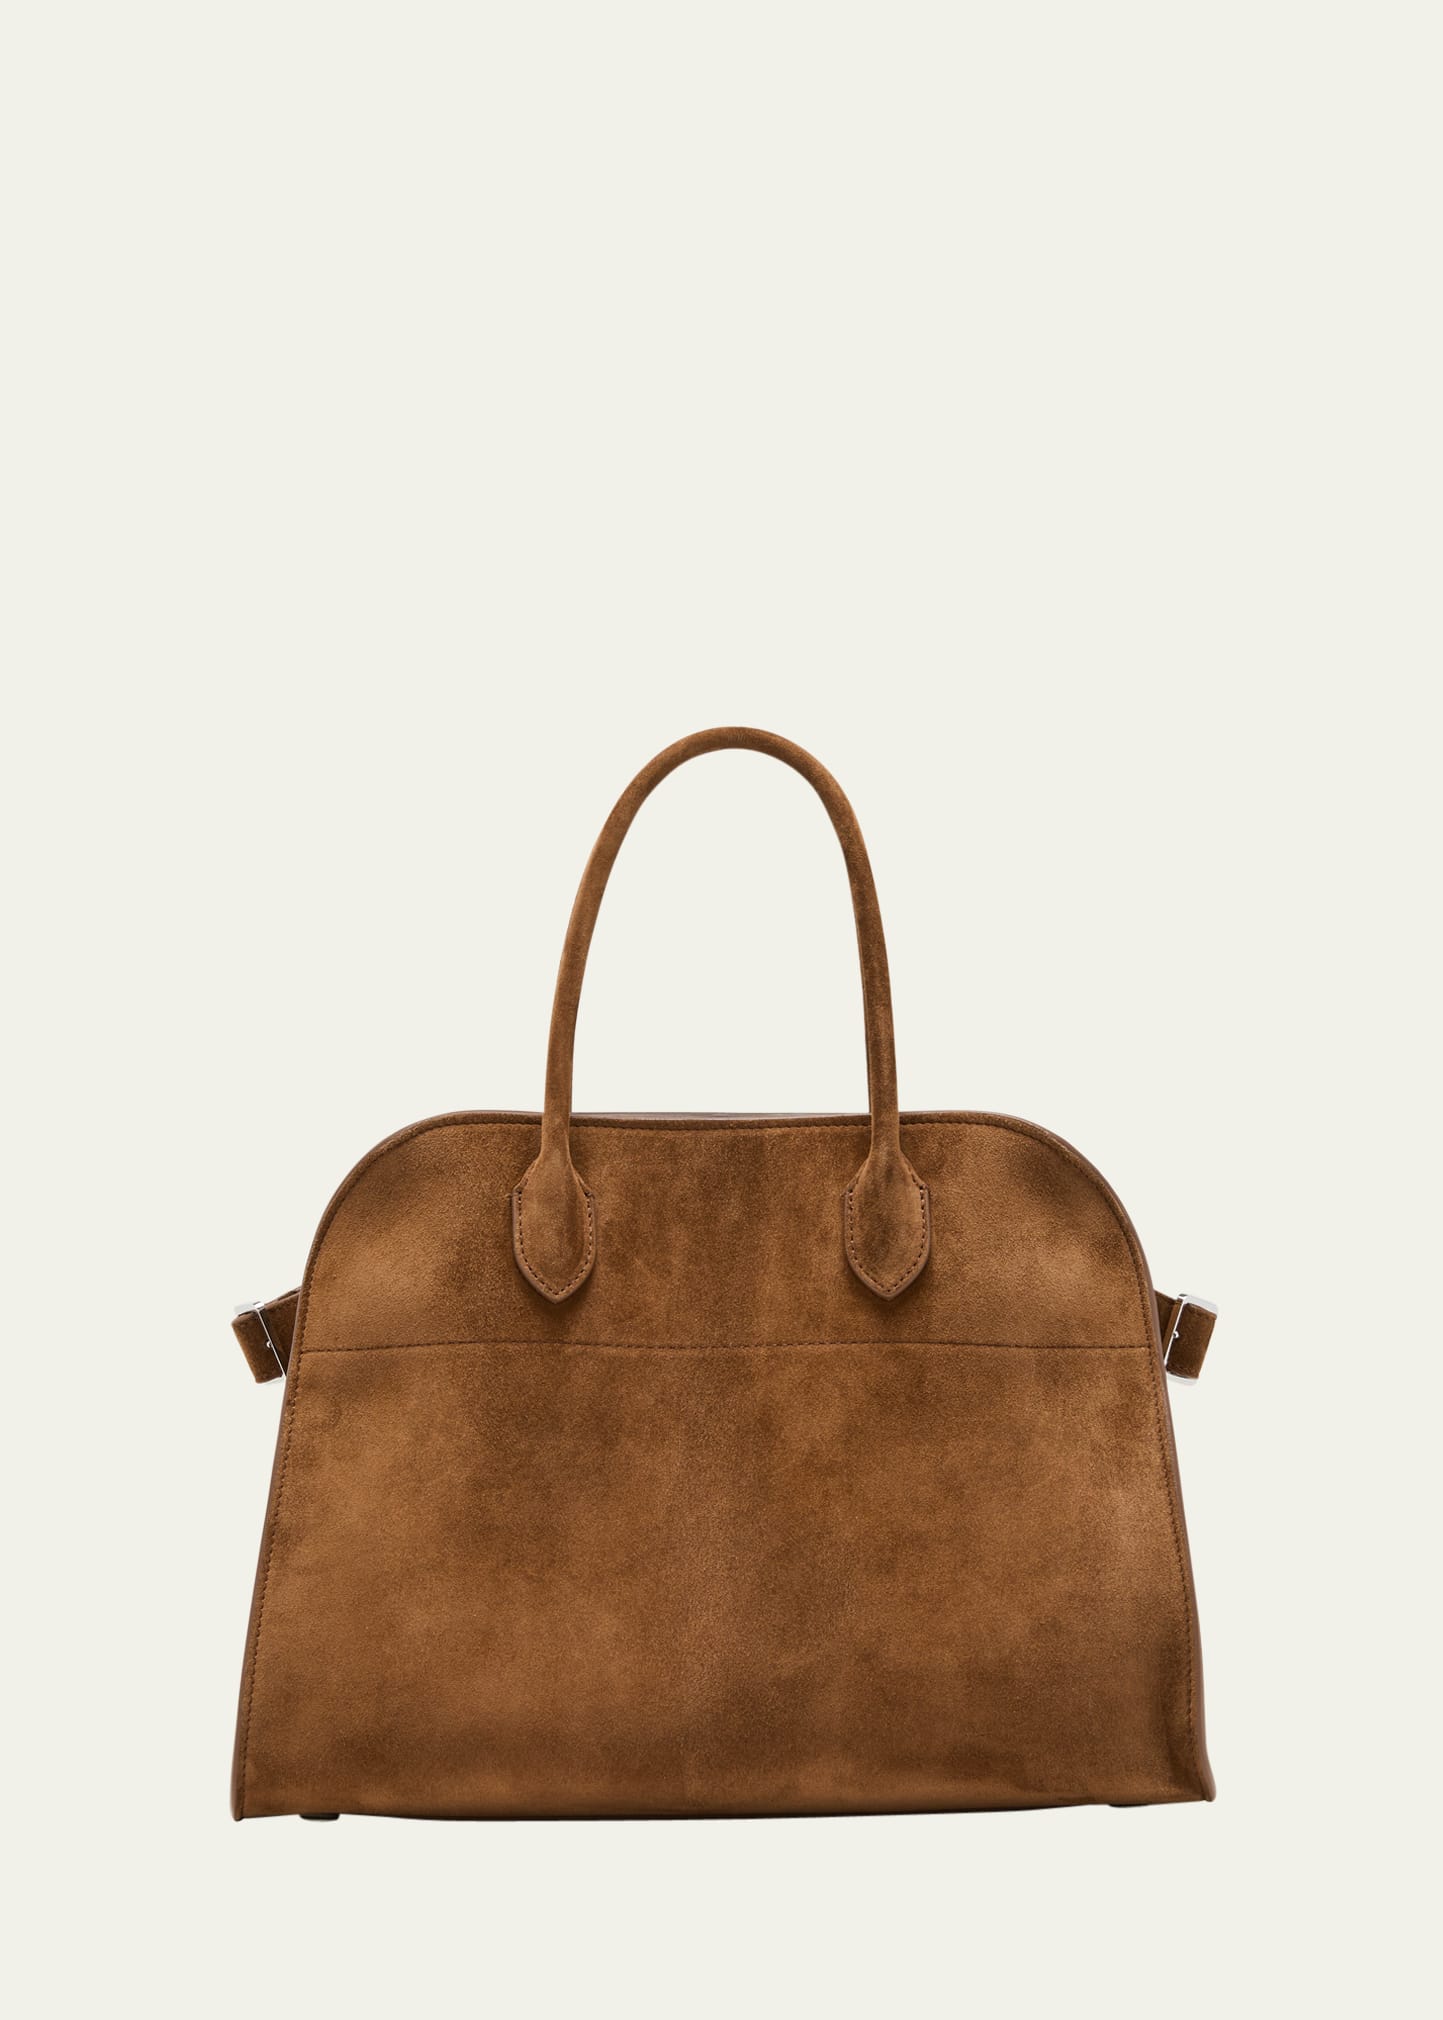 THE ROW MARGAUX 12 TOP-HANDLE BAG IN SUEDE